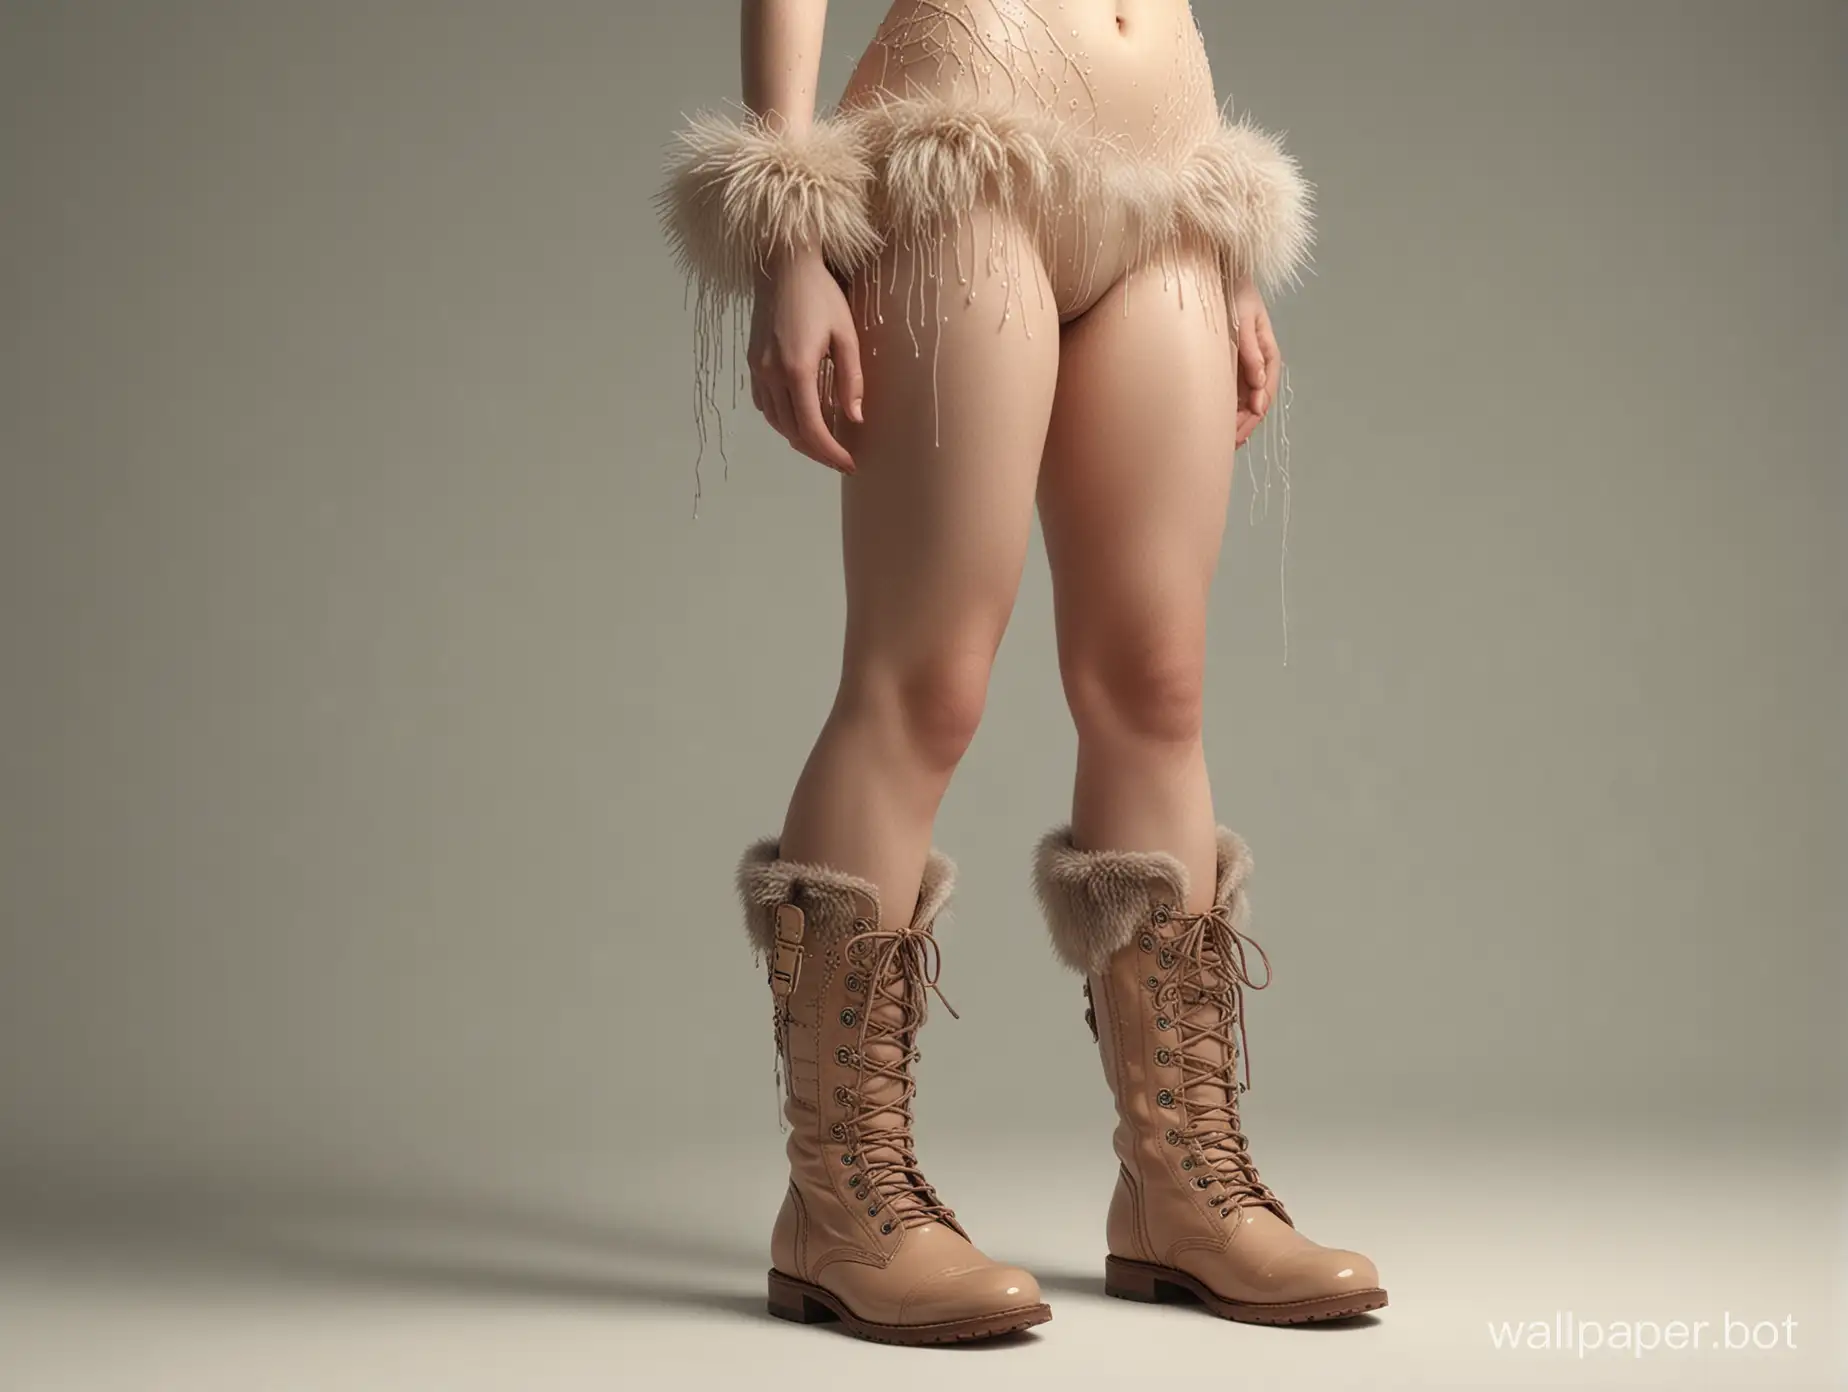 Girl with reflective wet eyes, nude, textile art, naked, intricate stitches, nude, fur boots, full length character, side lighting, sharpness, dynamic lighting, clear, sharp focus. 32k, styled by Mark Ryden, Alessio Albi, artistic intricate scenery, intricate details.